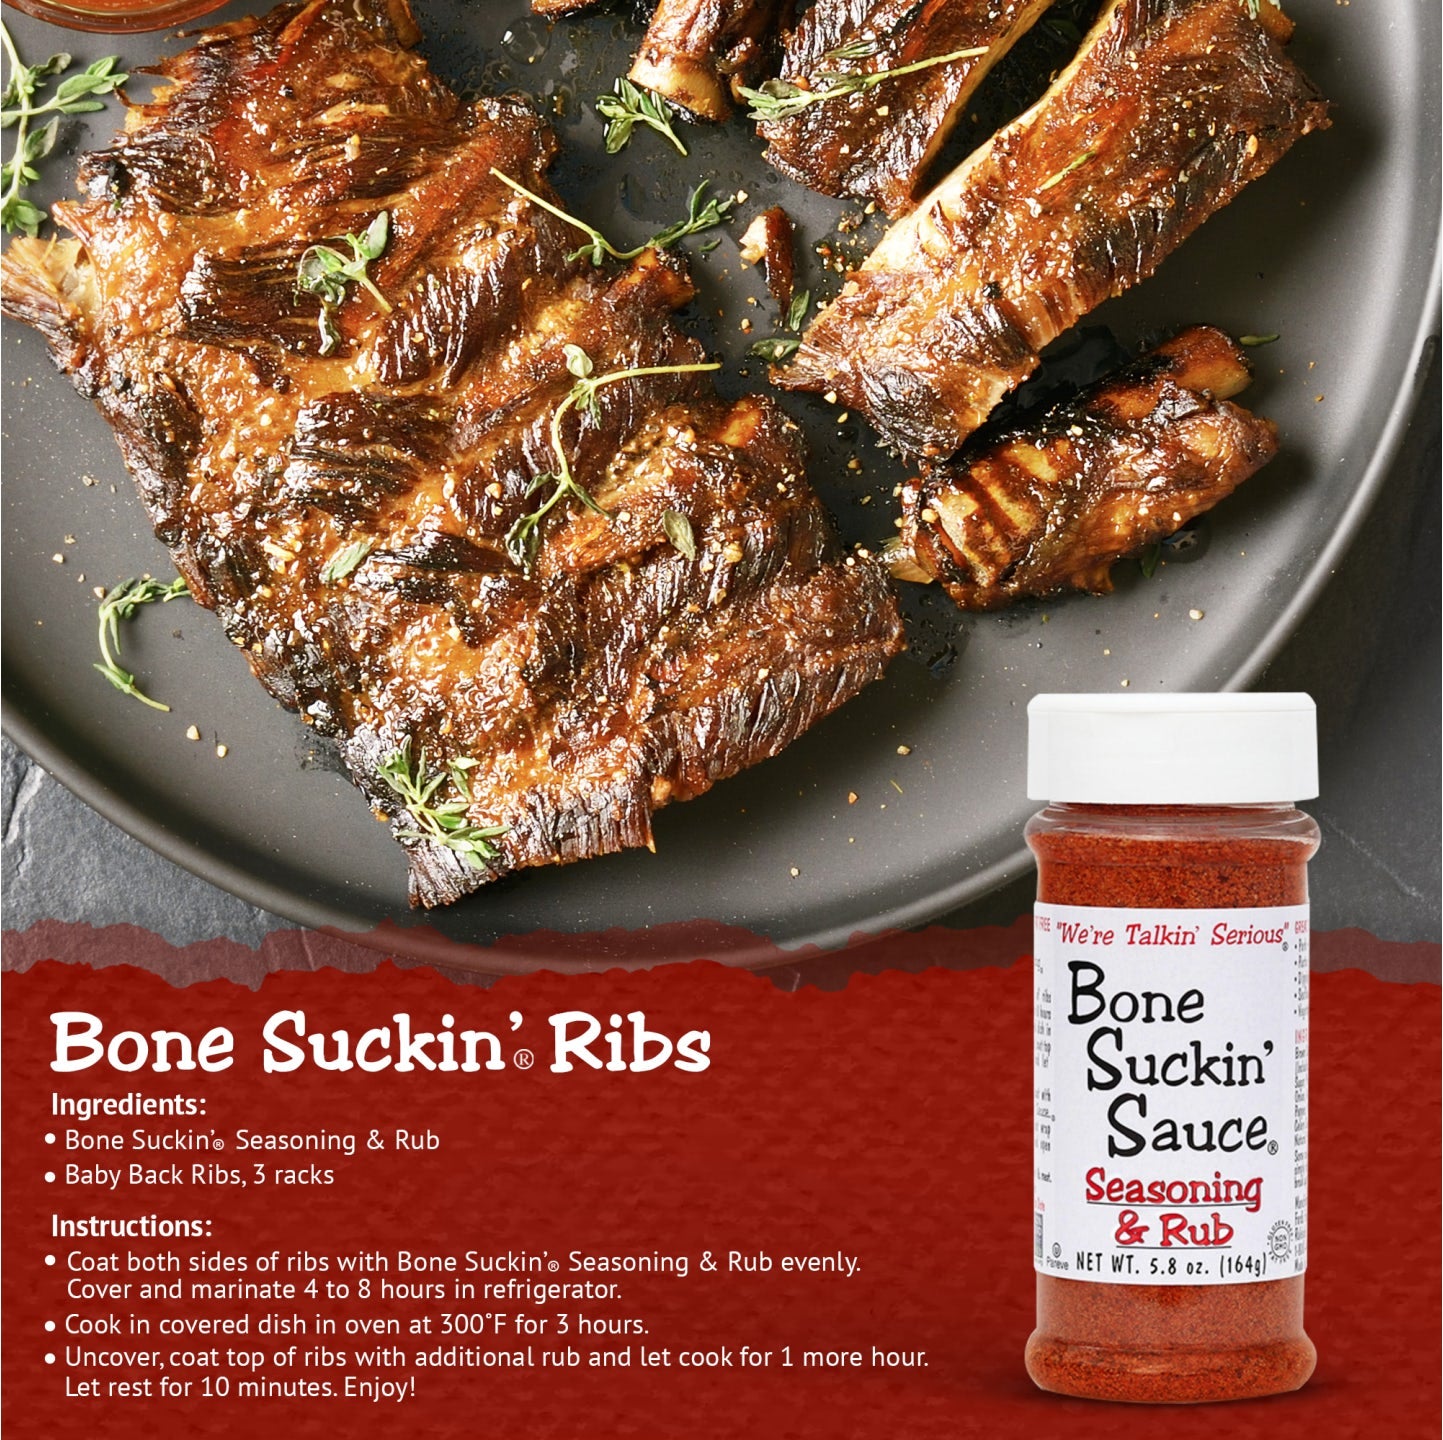 Bone Suckin Ribs. Ingredients: Bone Suckin Seasoning & Rub. Baby Back Ribs, 3 racks. Instructions: Coat both sides of ribs with Bone Suckin Seasoning & Rub evenly. Cover and marinate 4-8 hours in refrigerator. Cook in covered dish in oven at 300 F for 3 hours. Uncover, coat top of ribs with additional rub and let cook for 1 more hour. Let rest for 10 minutes. Enjoy!